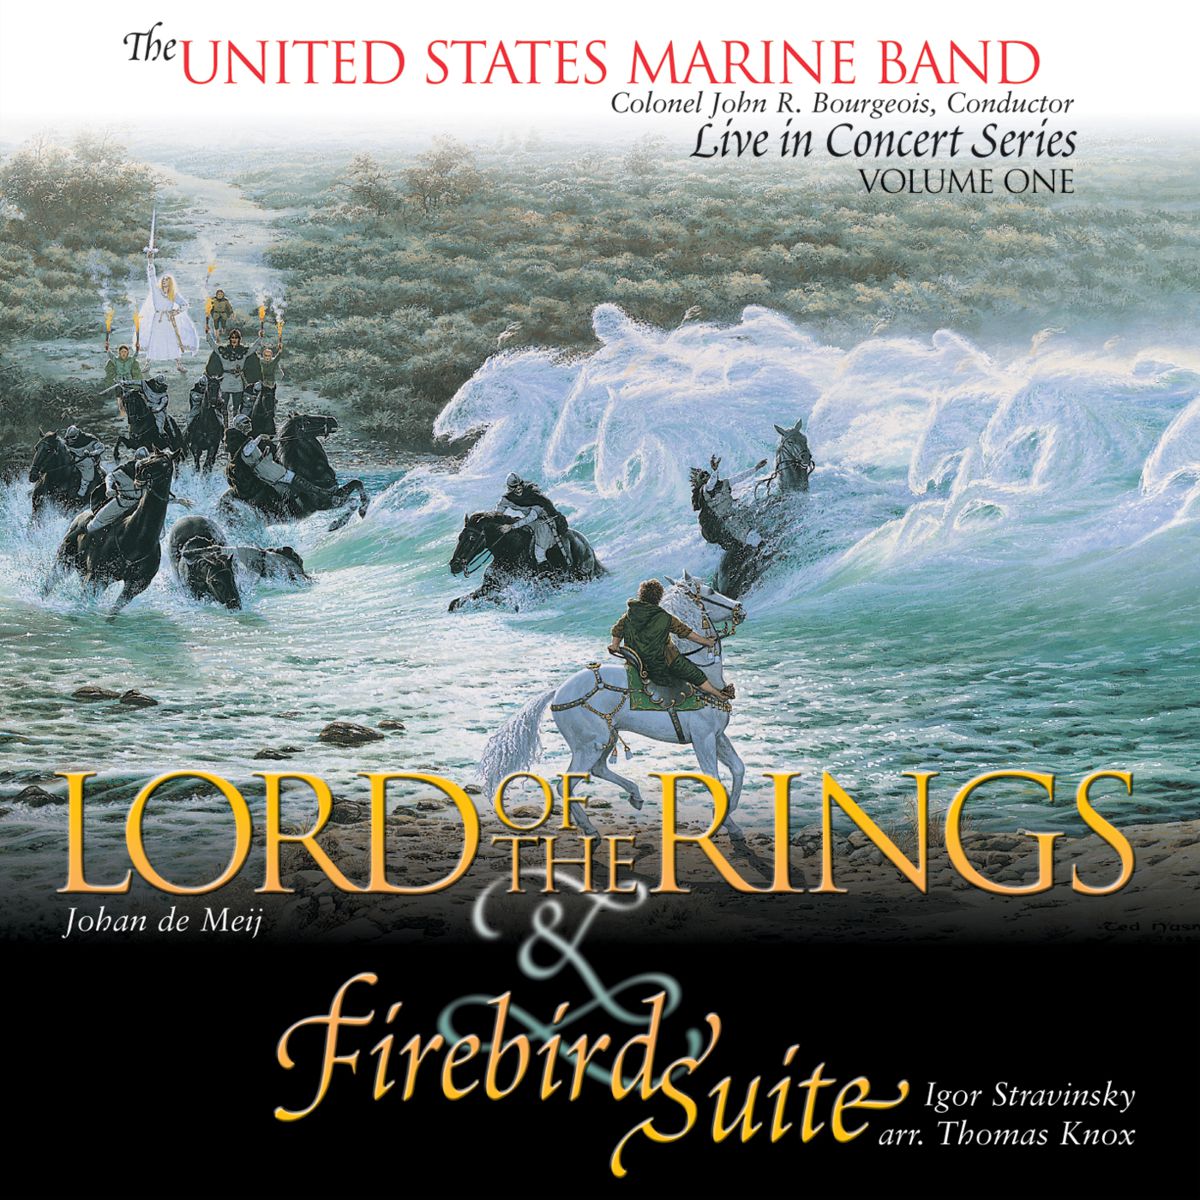 Lord of the Rings and Firebird Suite - cliquer ici